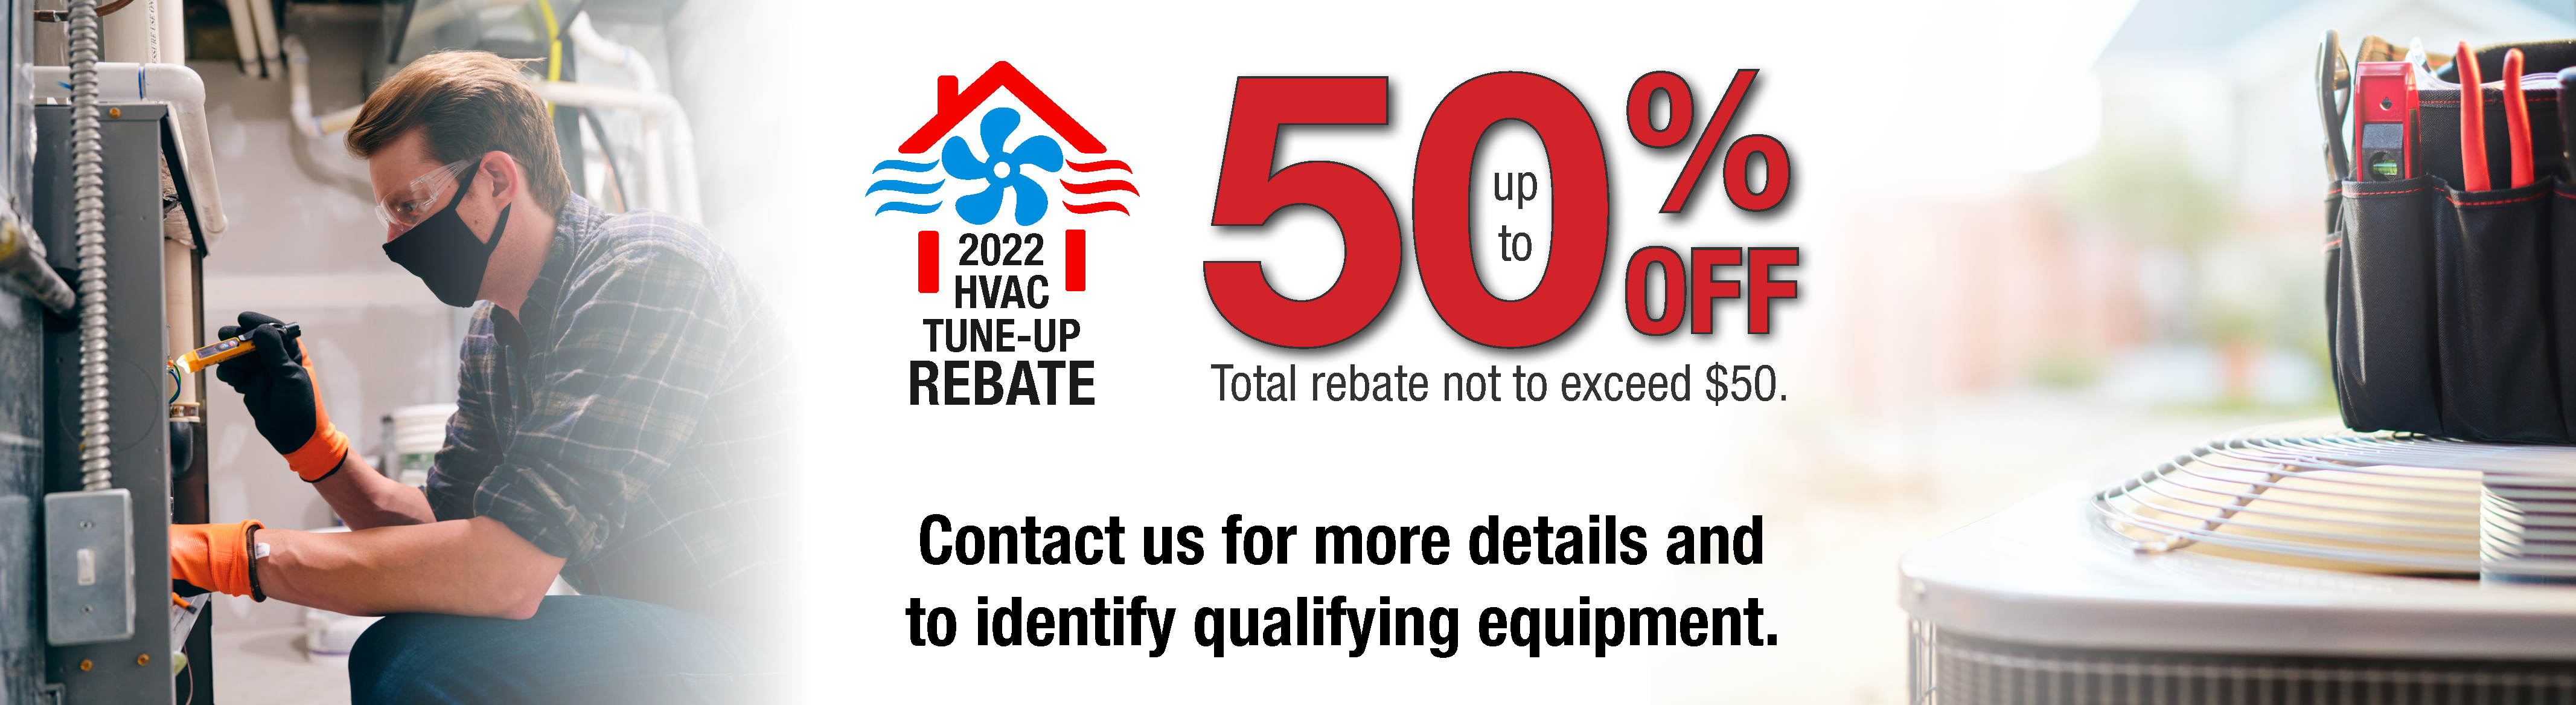 Get a rebate of up to $50 dollars for your routine HVAC tune up each year, click here for a rebate application.